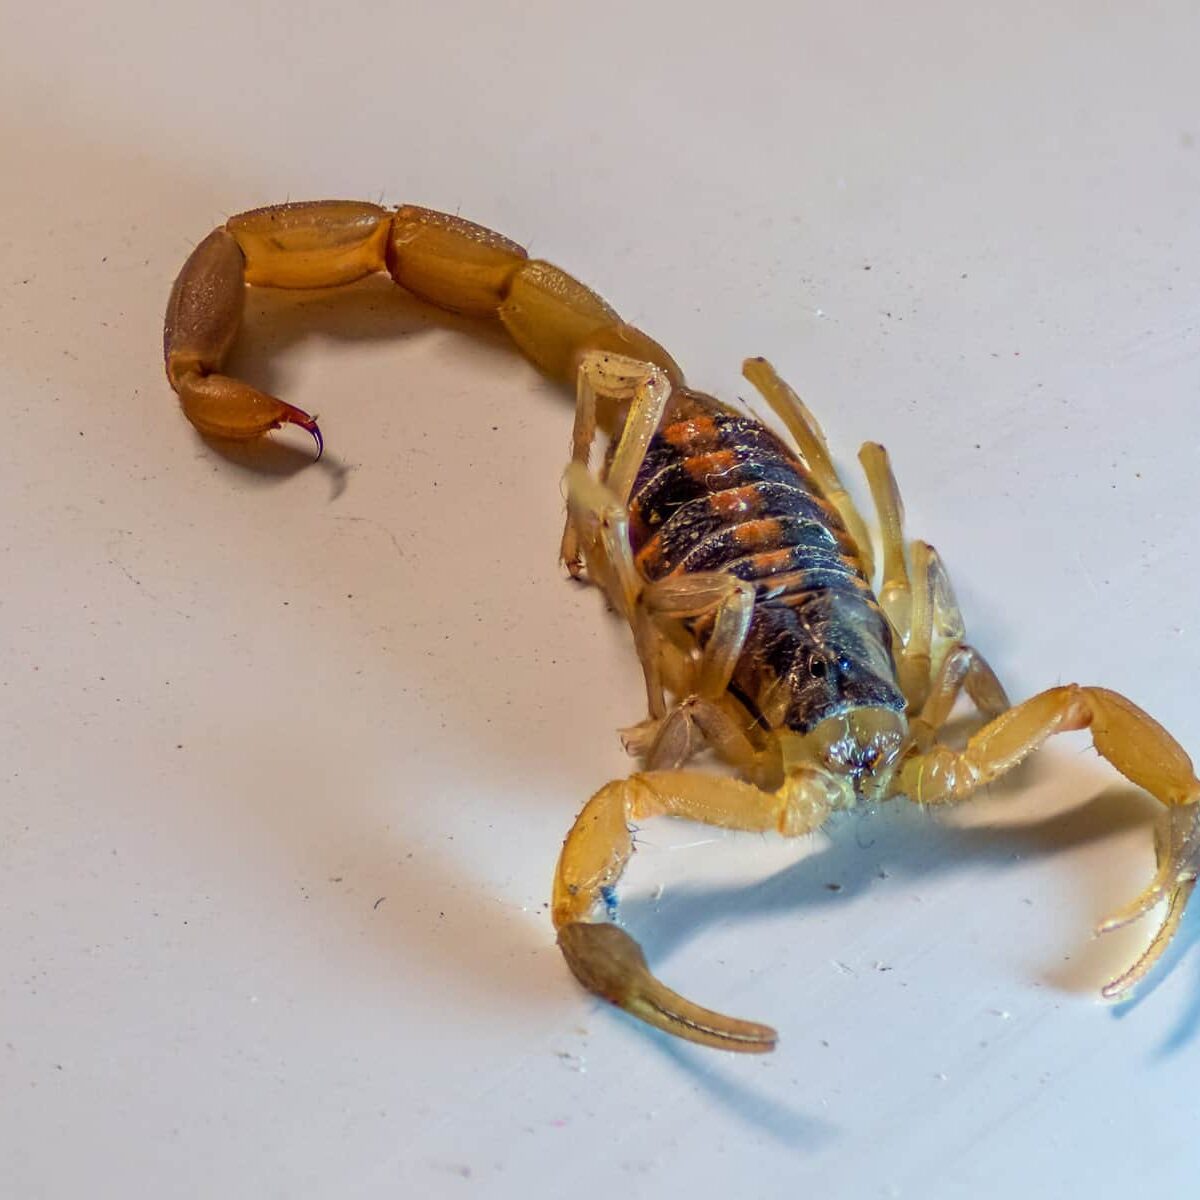 Close Up View of Bark Scorpion On White Surface